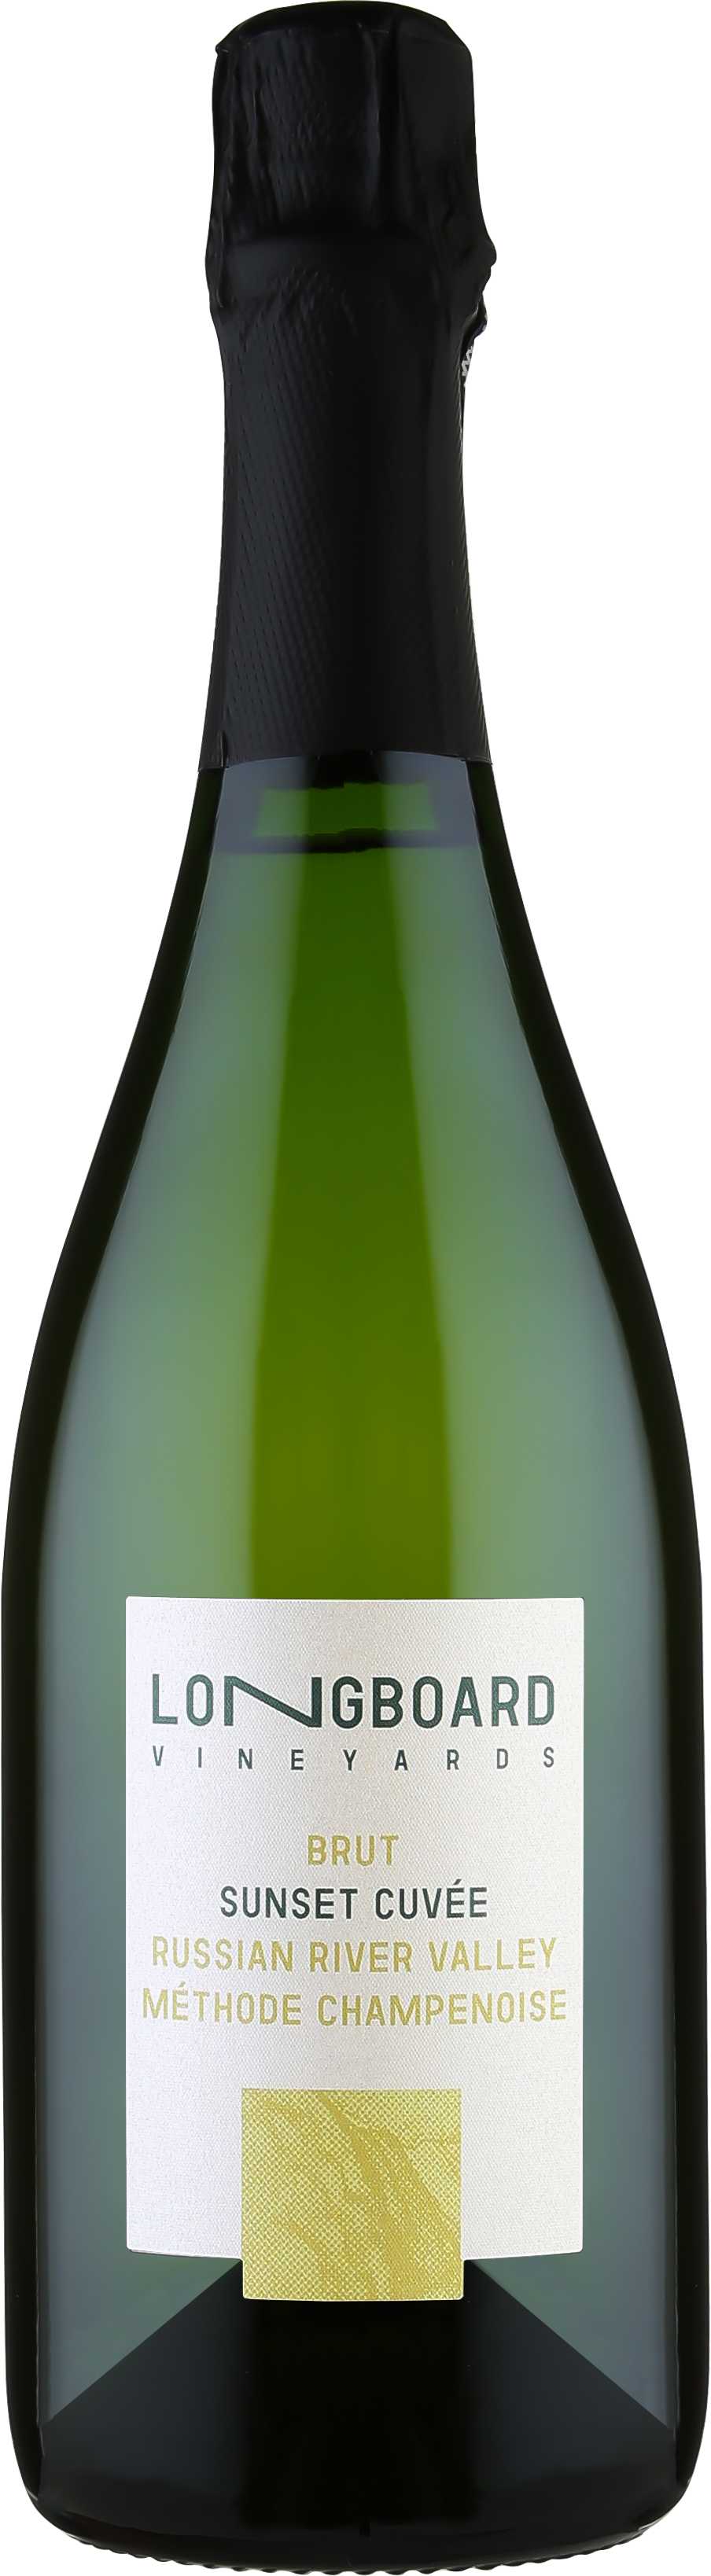 Brut - Sunset Cuvee (Prerelease to Wine Club only) Photo